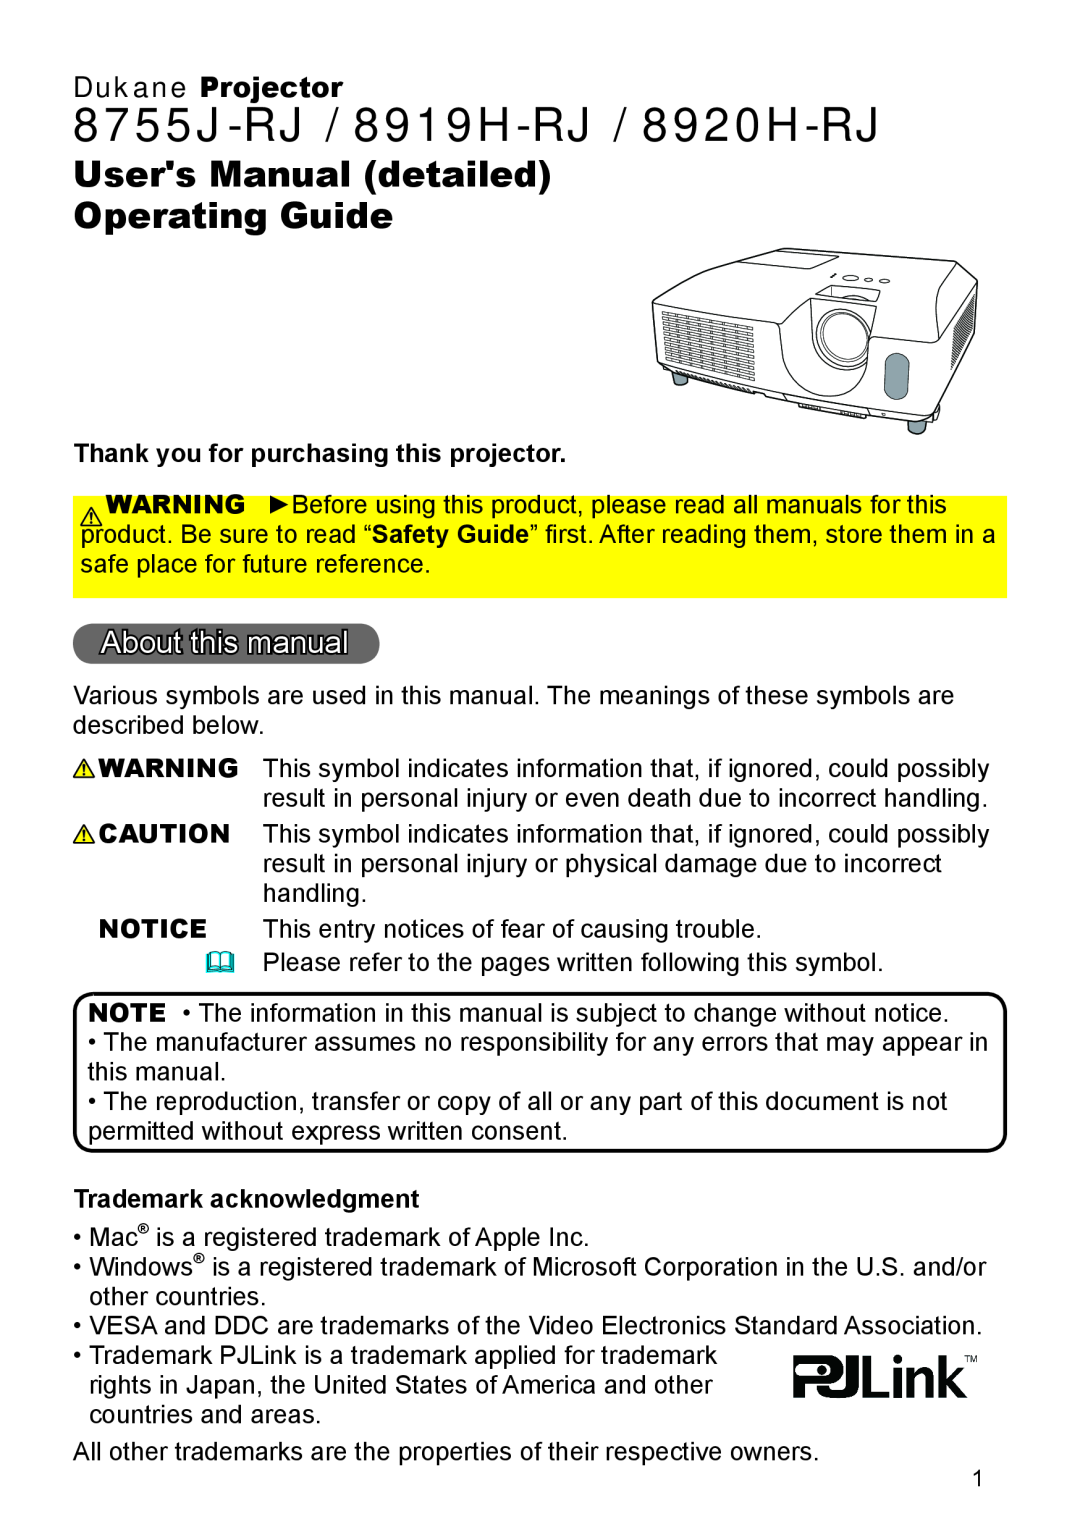 Dukane 8919H-RJ, 8920H-RJ user manual About this manual, Dukane Projector, Thank you for purchasing this projector 